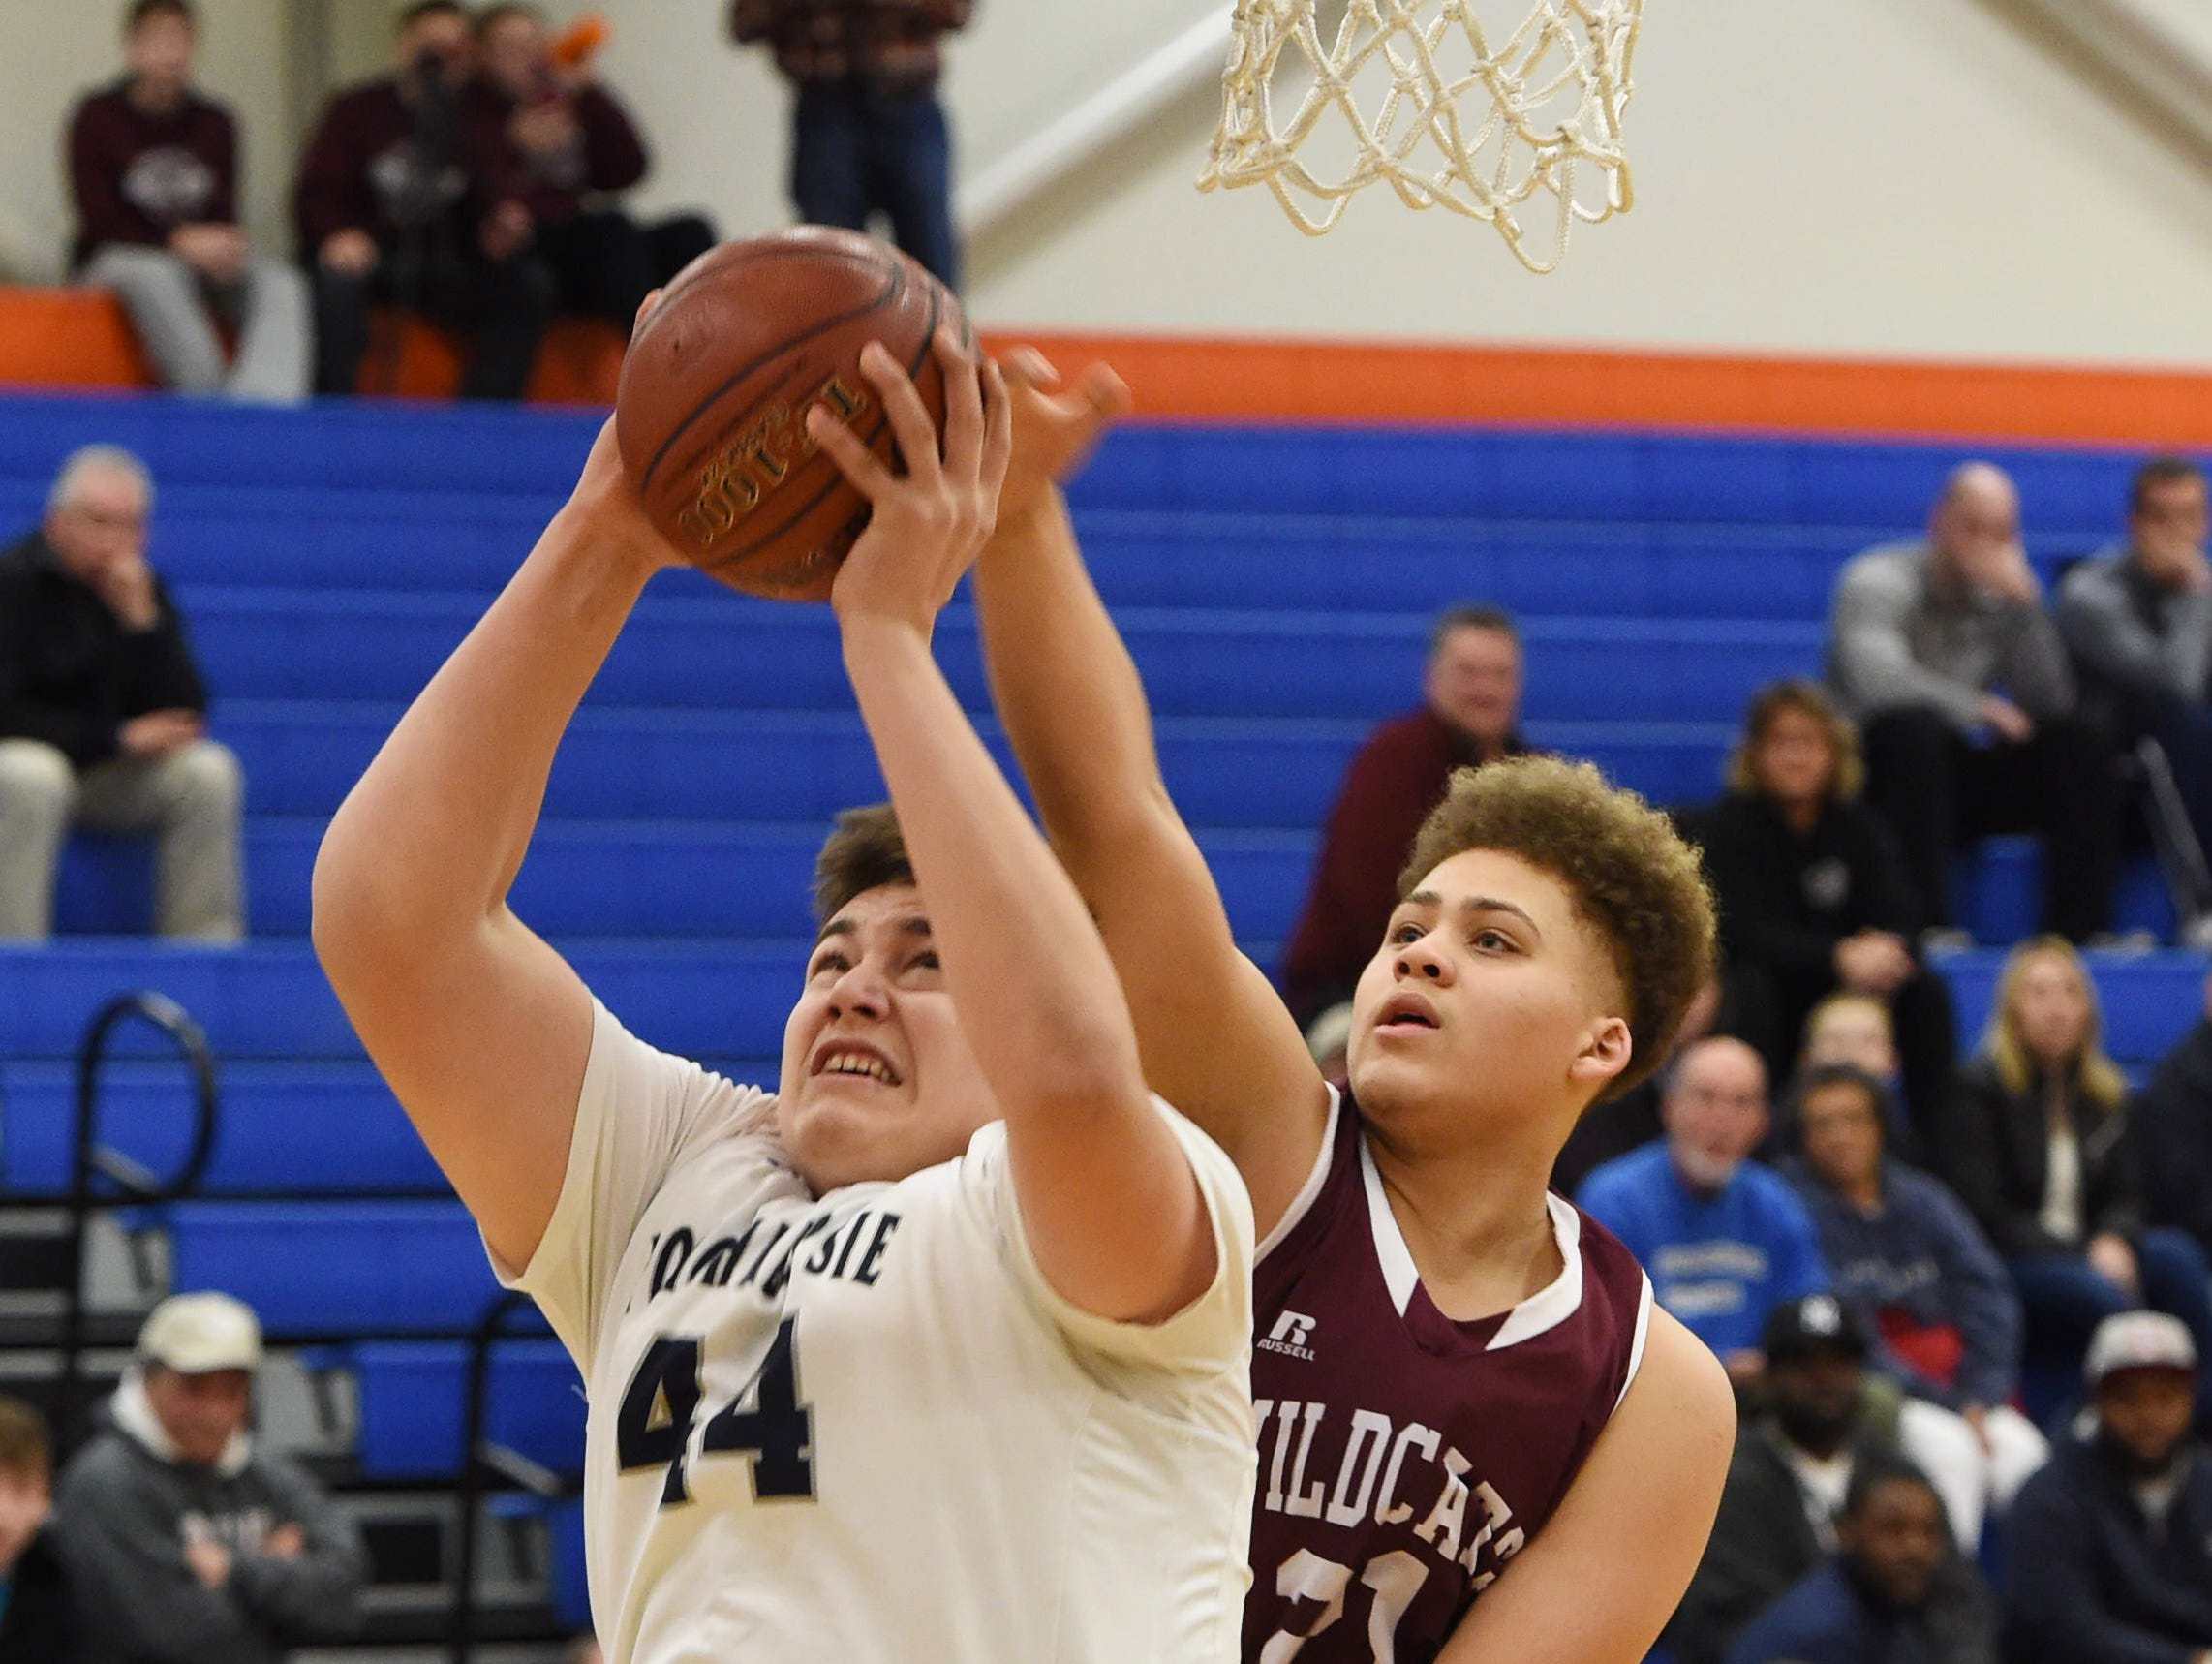 Poughkeepsie's Corey Simmons, left, goes for a layup as Johnson City's Xavier Hill, right, defends during the Class A regional semifinal game at SUNY New Paltz.